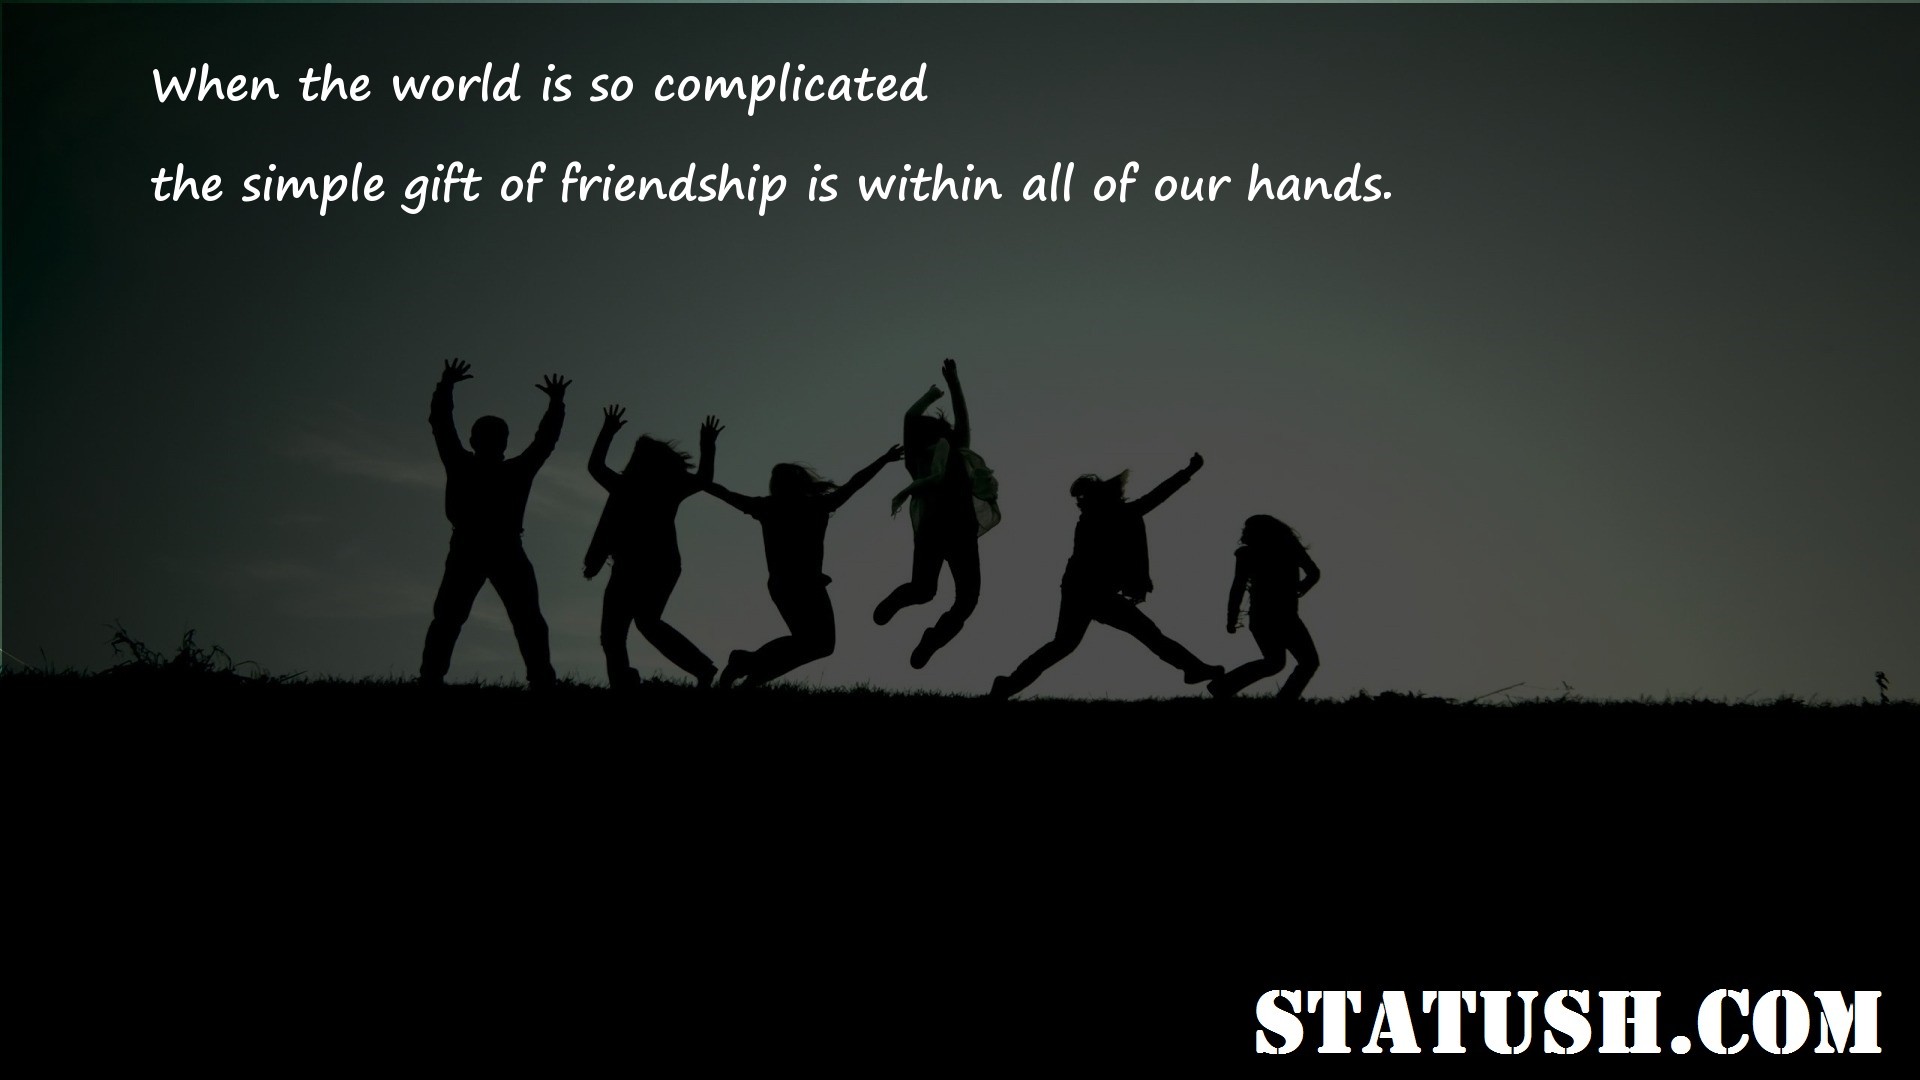 When the world is so complicated Friendship Quotes at statush.com